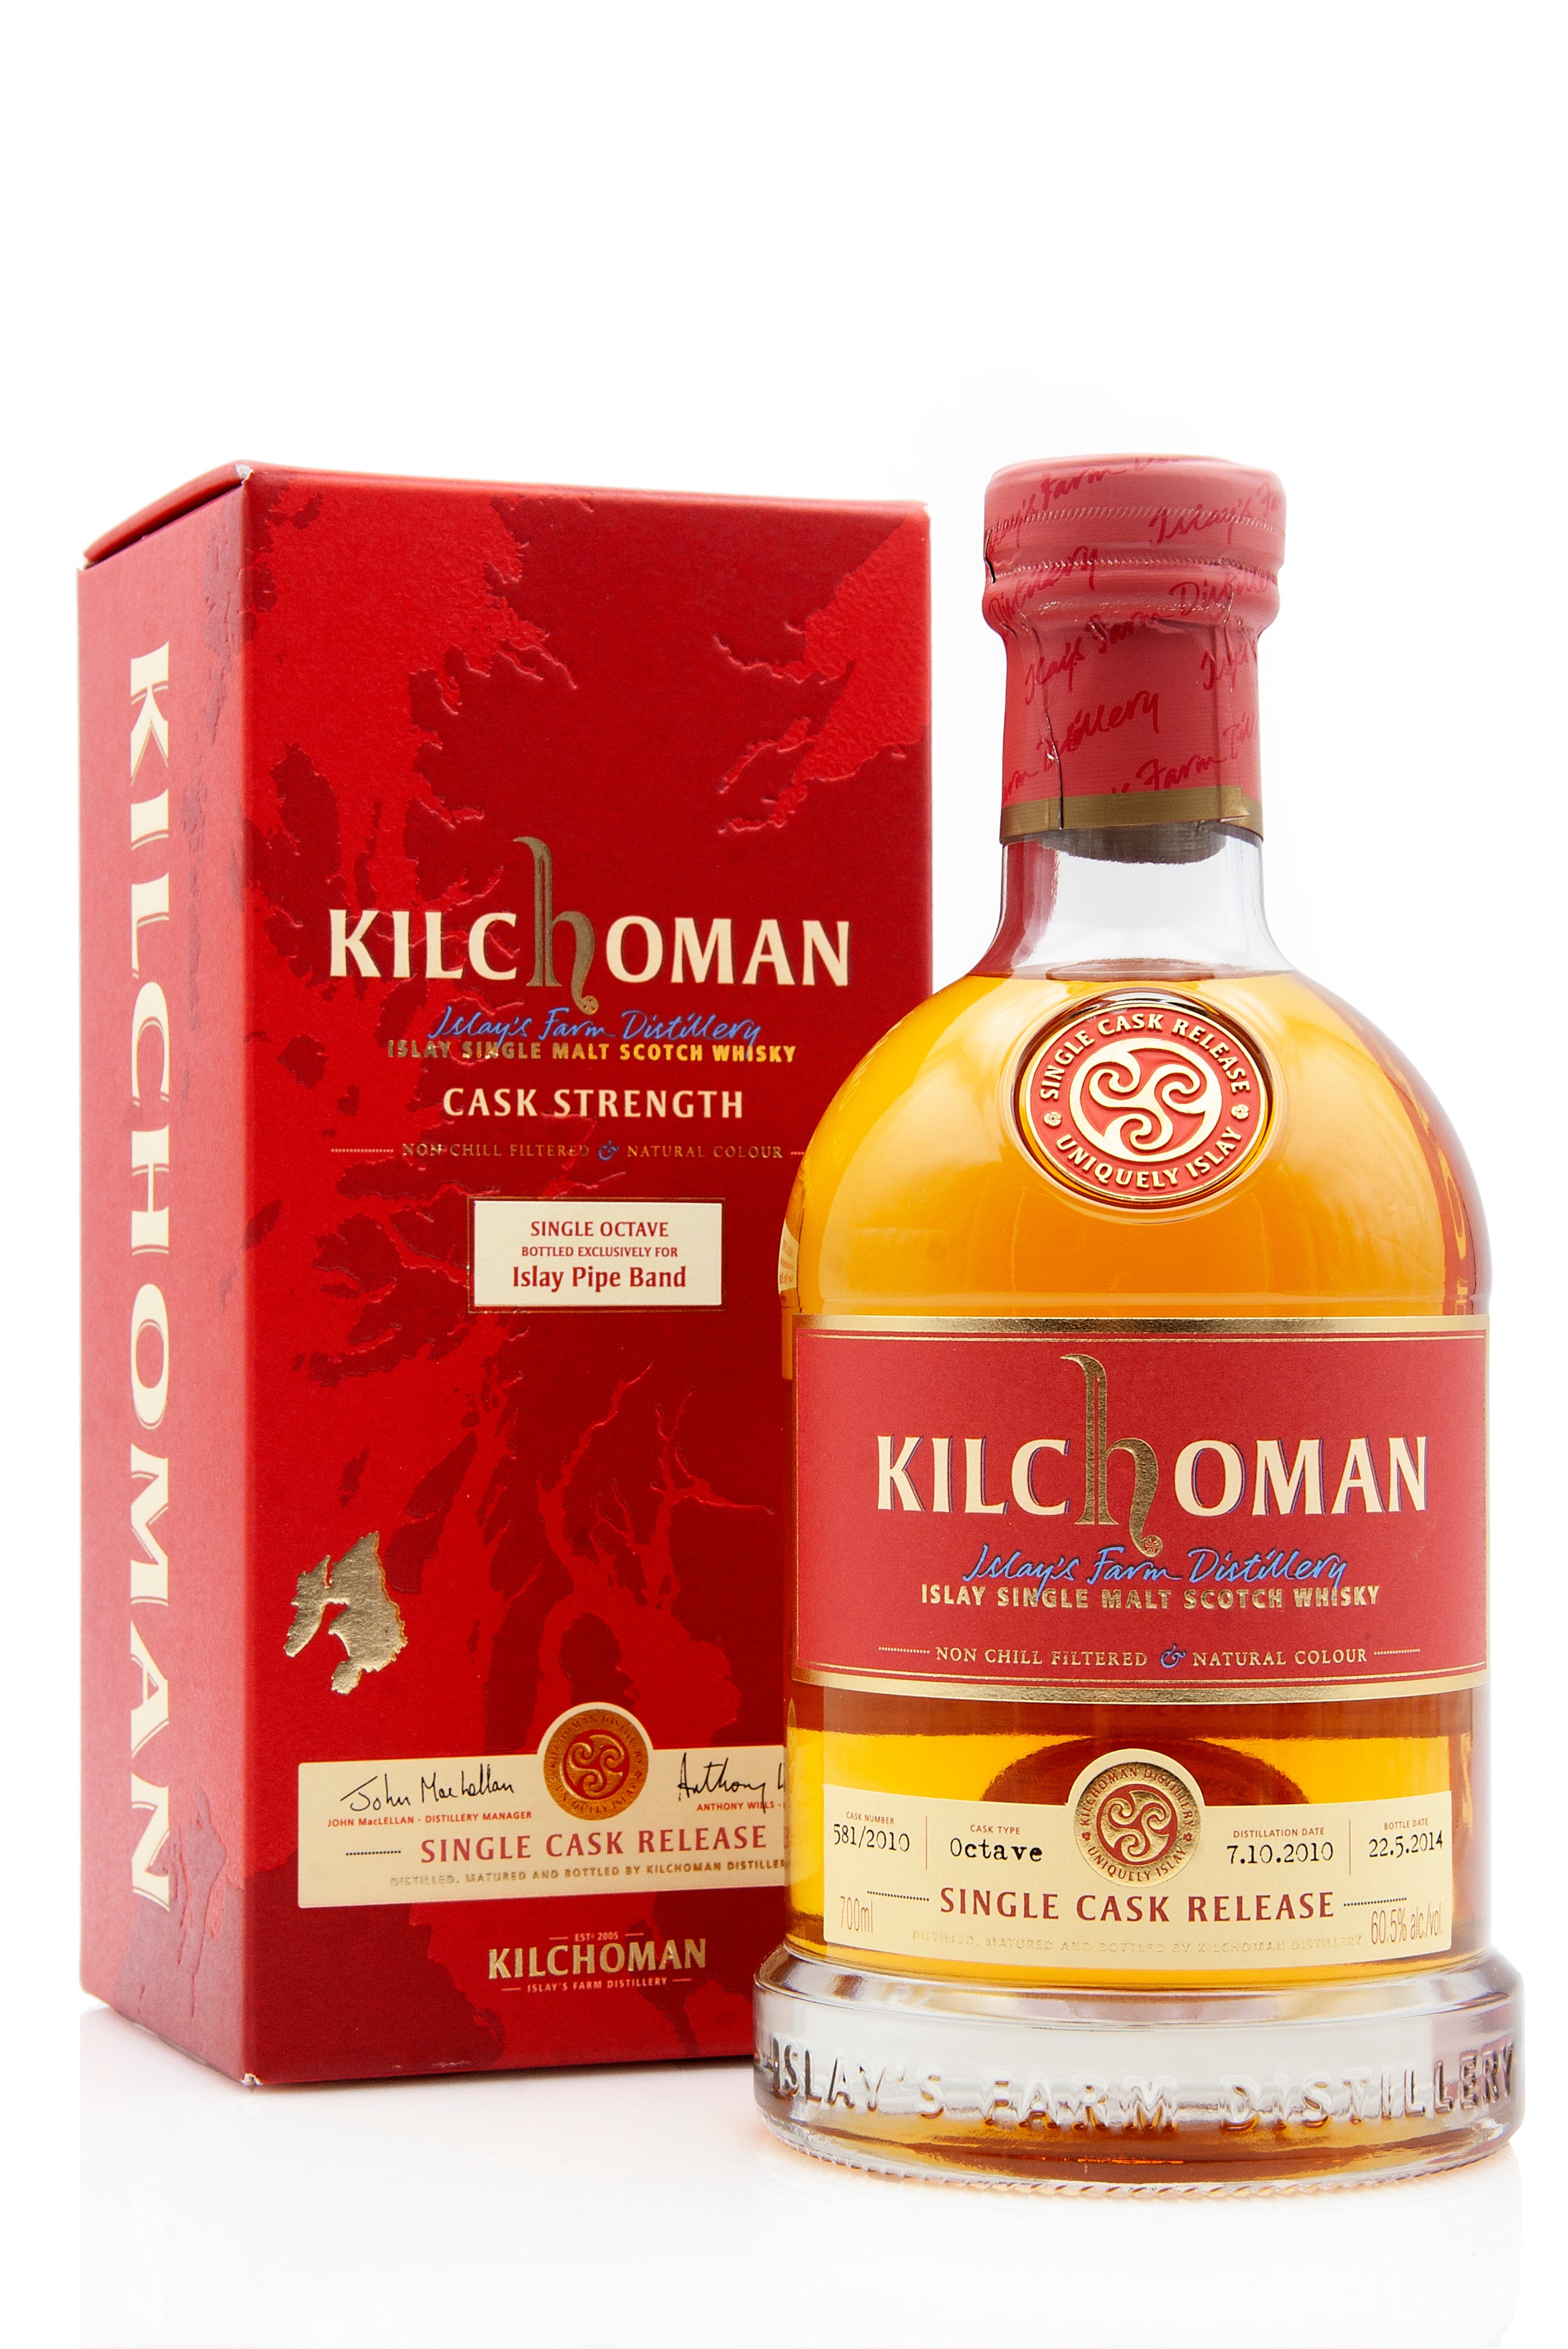 Kilchoman 2010 Vintage | Cask 581/2010 | Islay Pipe Band | Abbey Whisky Online